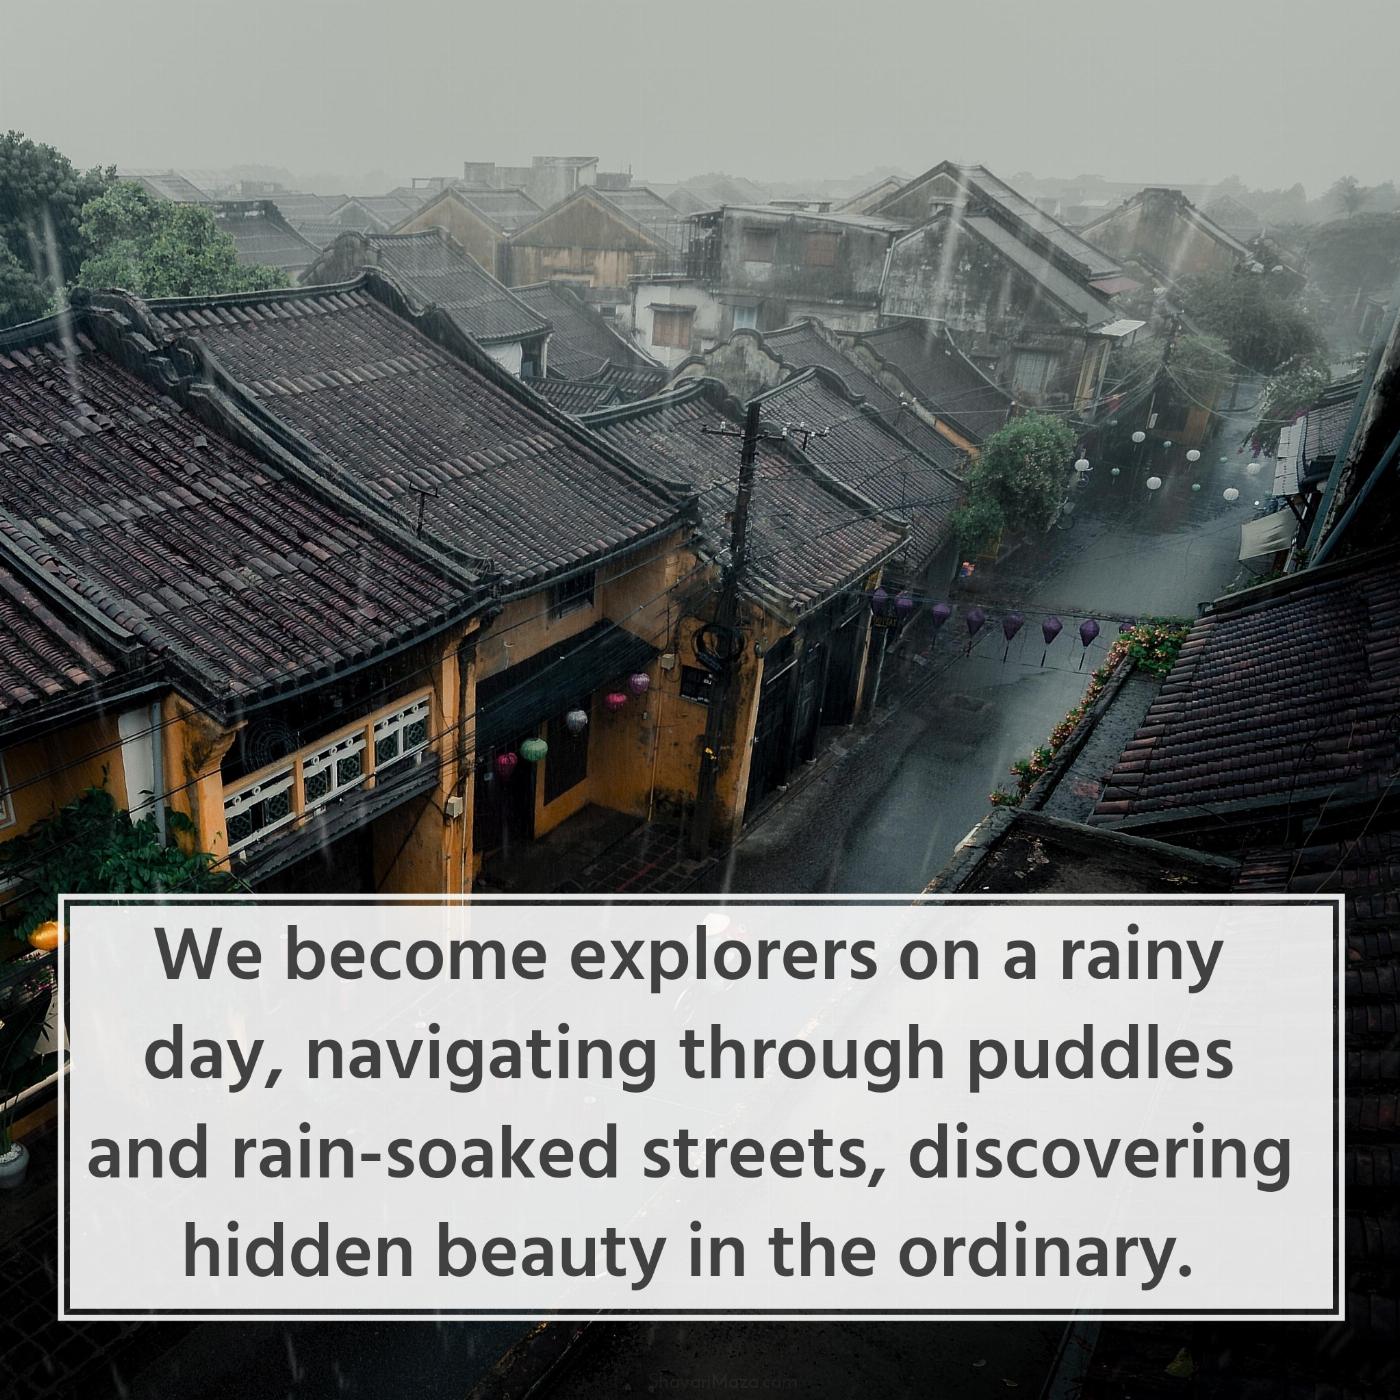 We become explorers on a rainy day